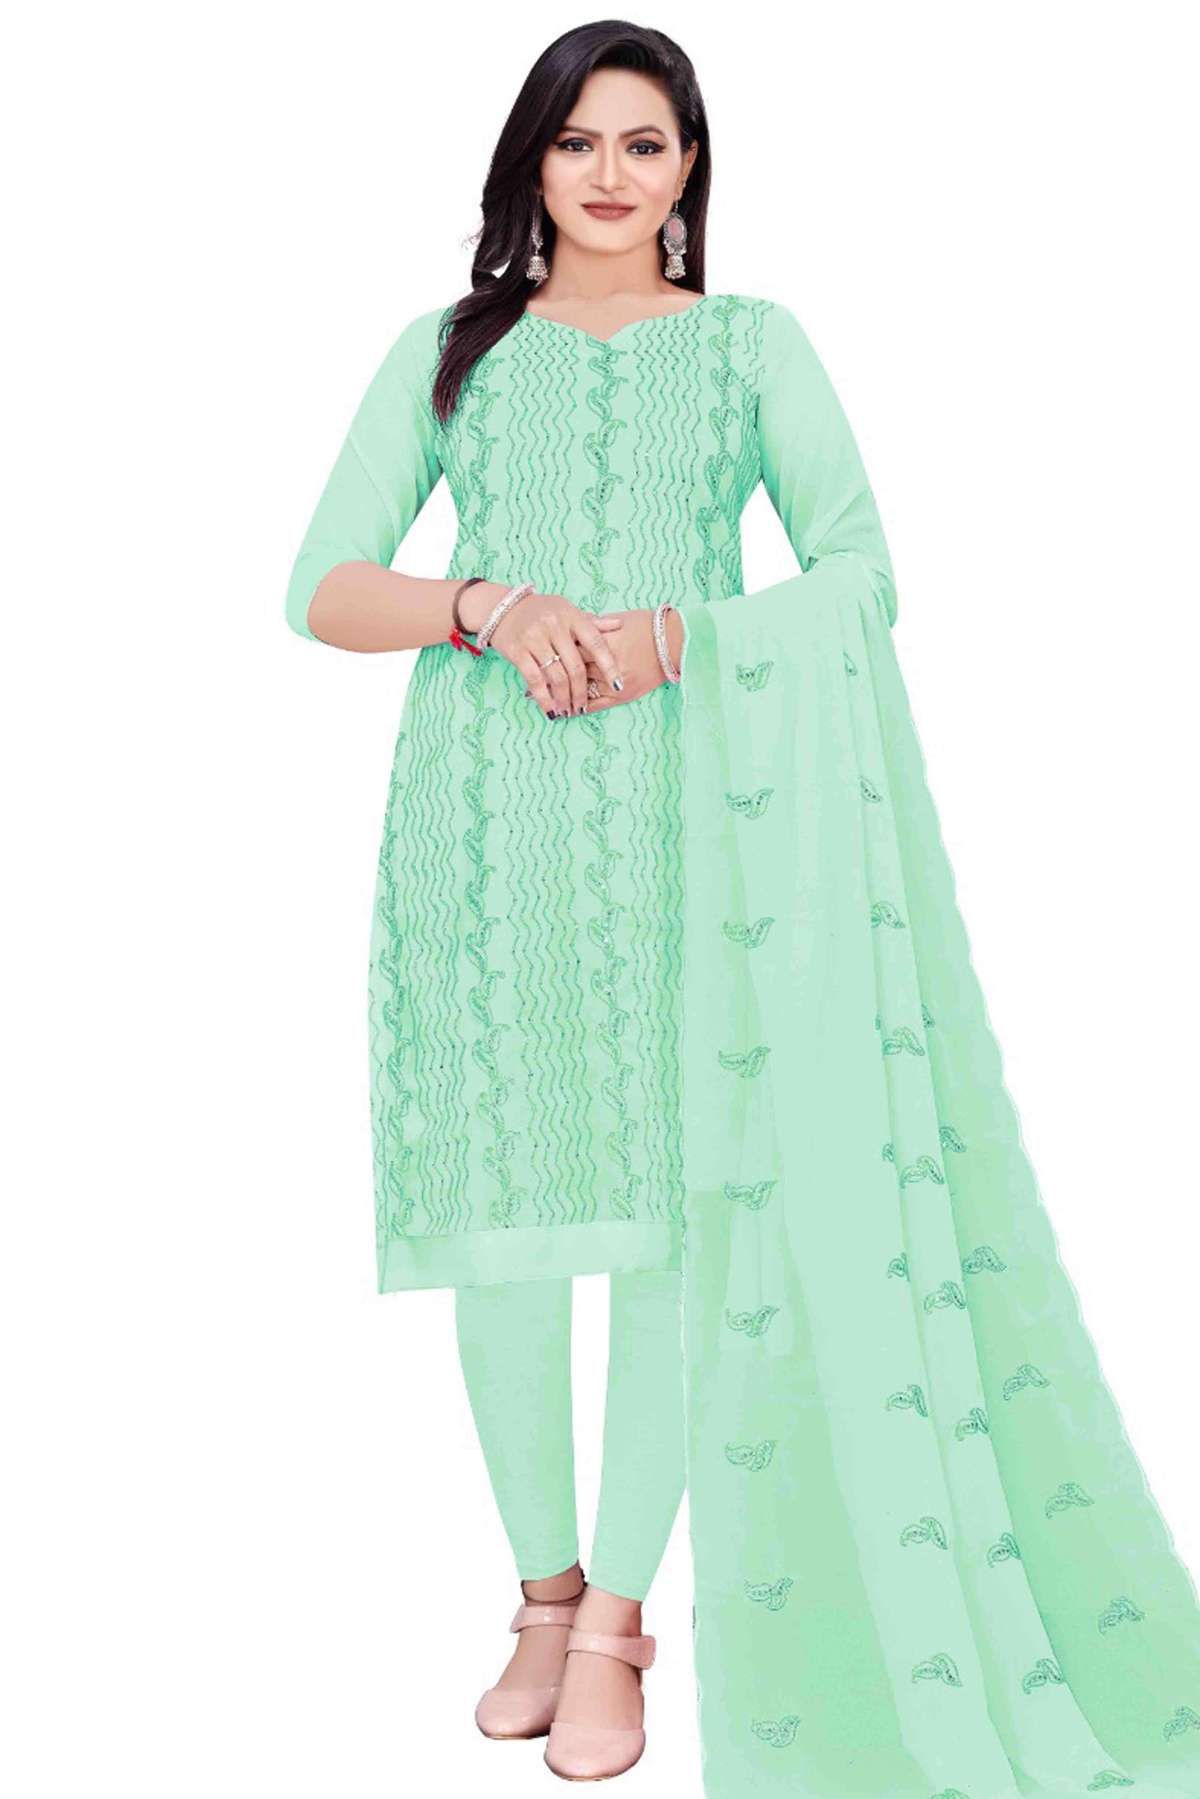 Unstitched Georgette Embroidery Churidar Suit In Sea Green Colour - US3234357